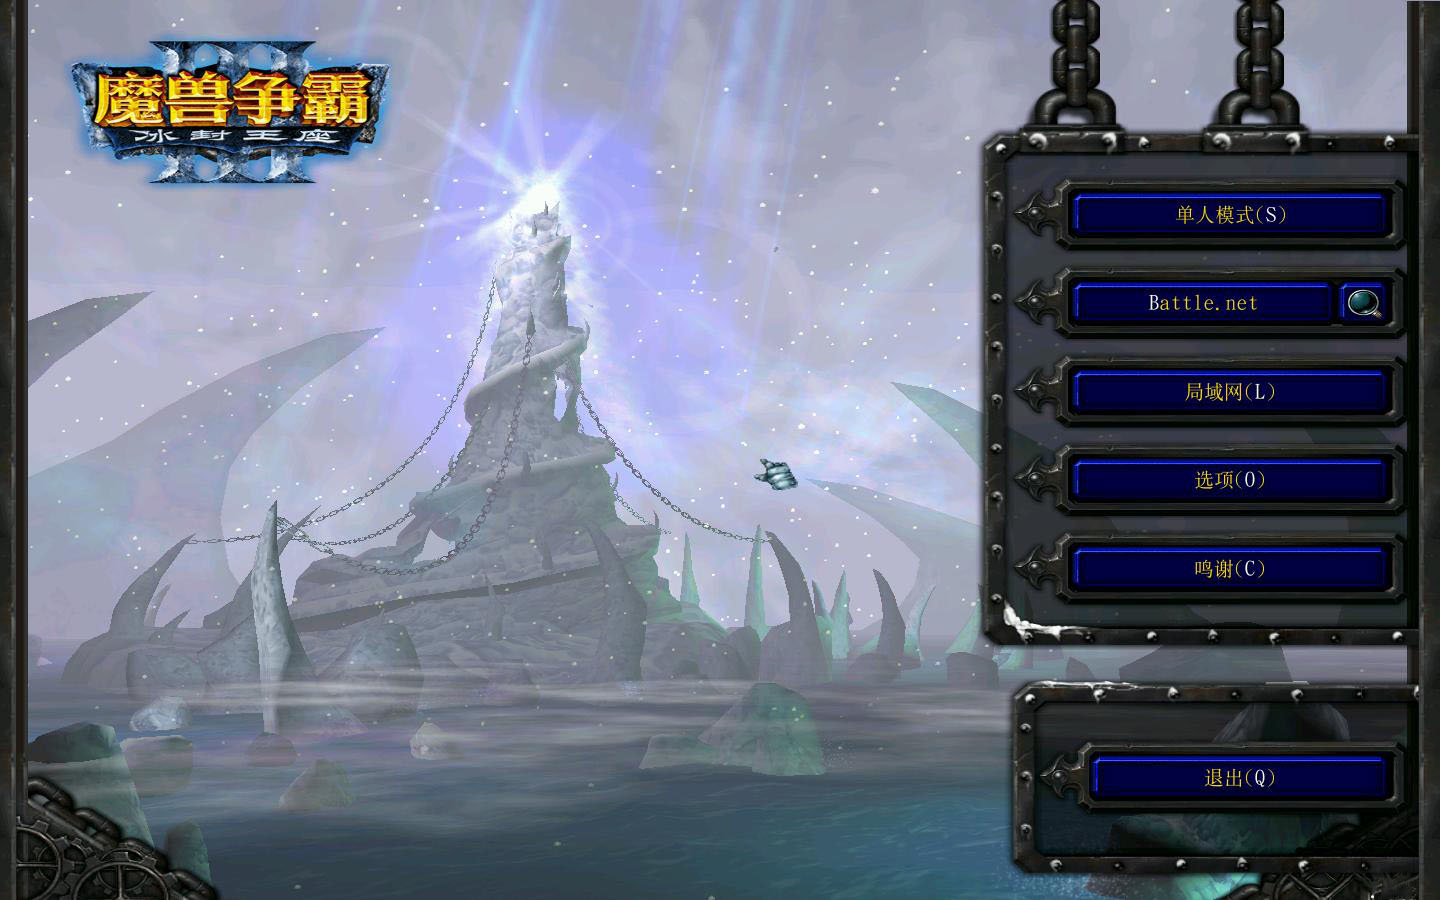 ħ3Warcraft III The Frozen Thronev1.24 v2.0.3ʽ